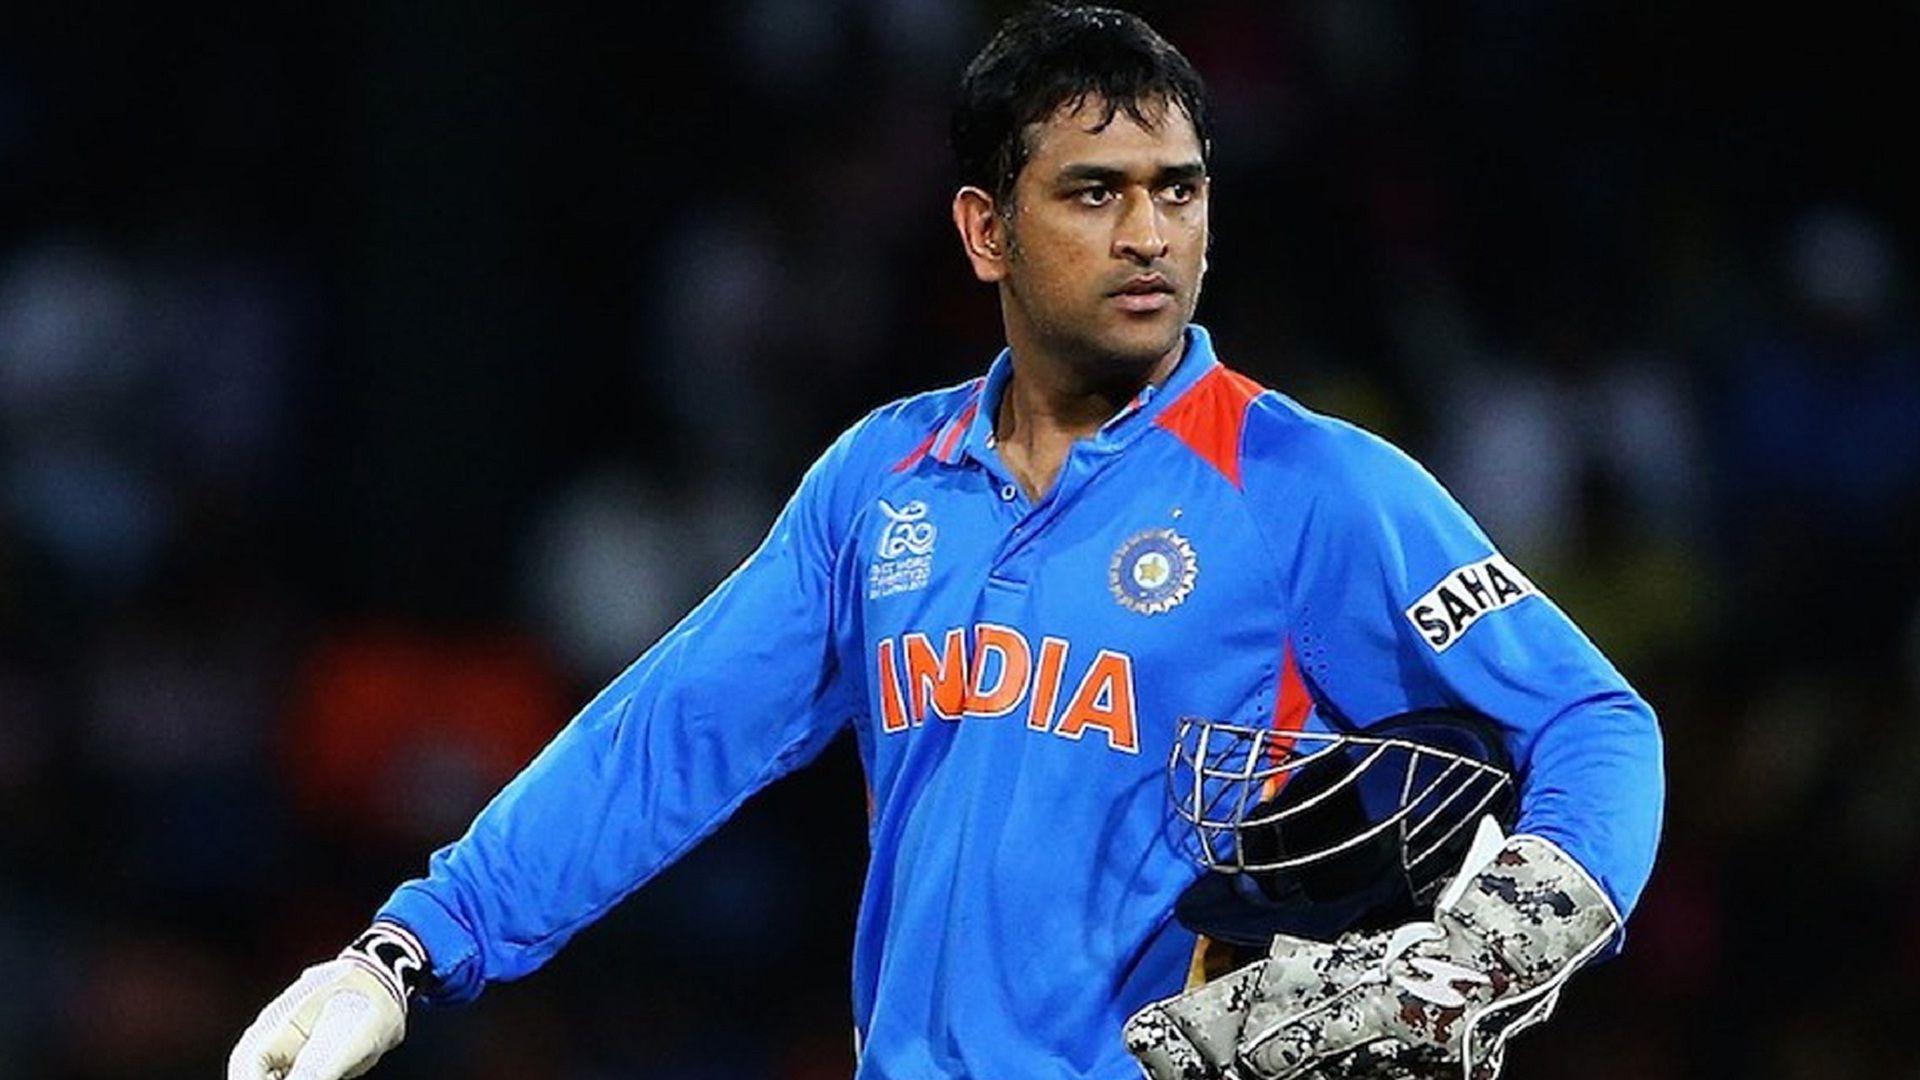 Ms Dhoni Wallpaper, image collections of wallpaper